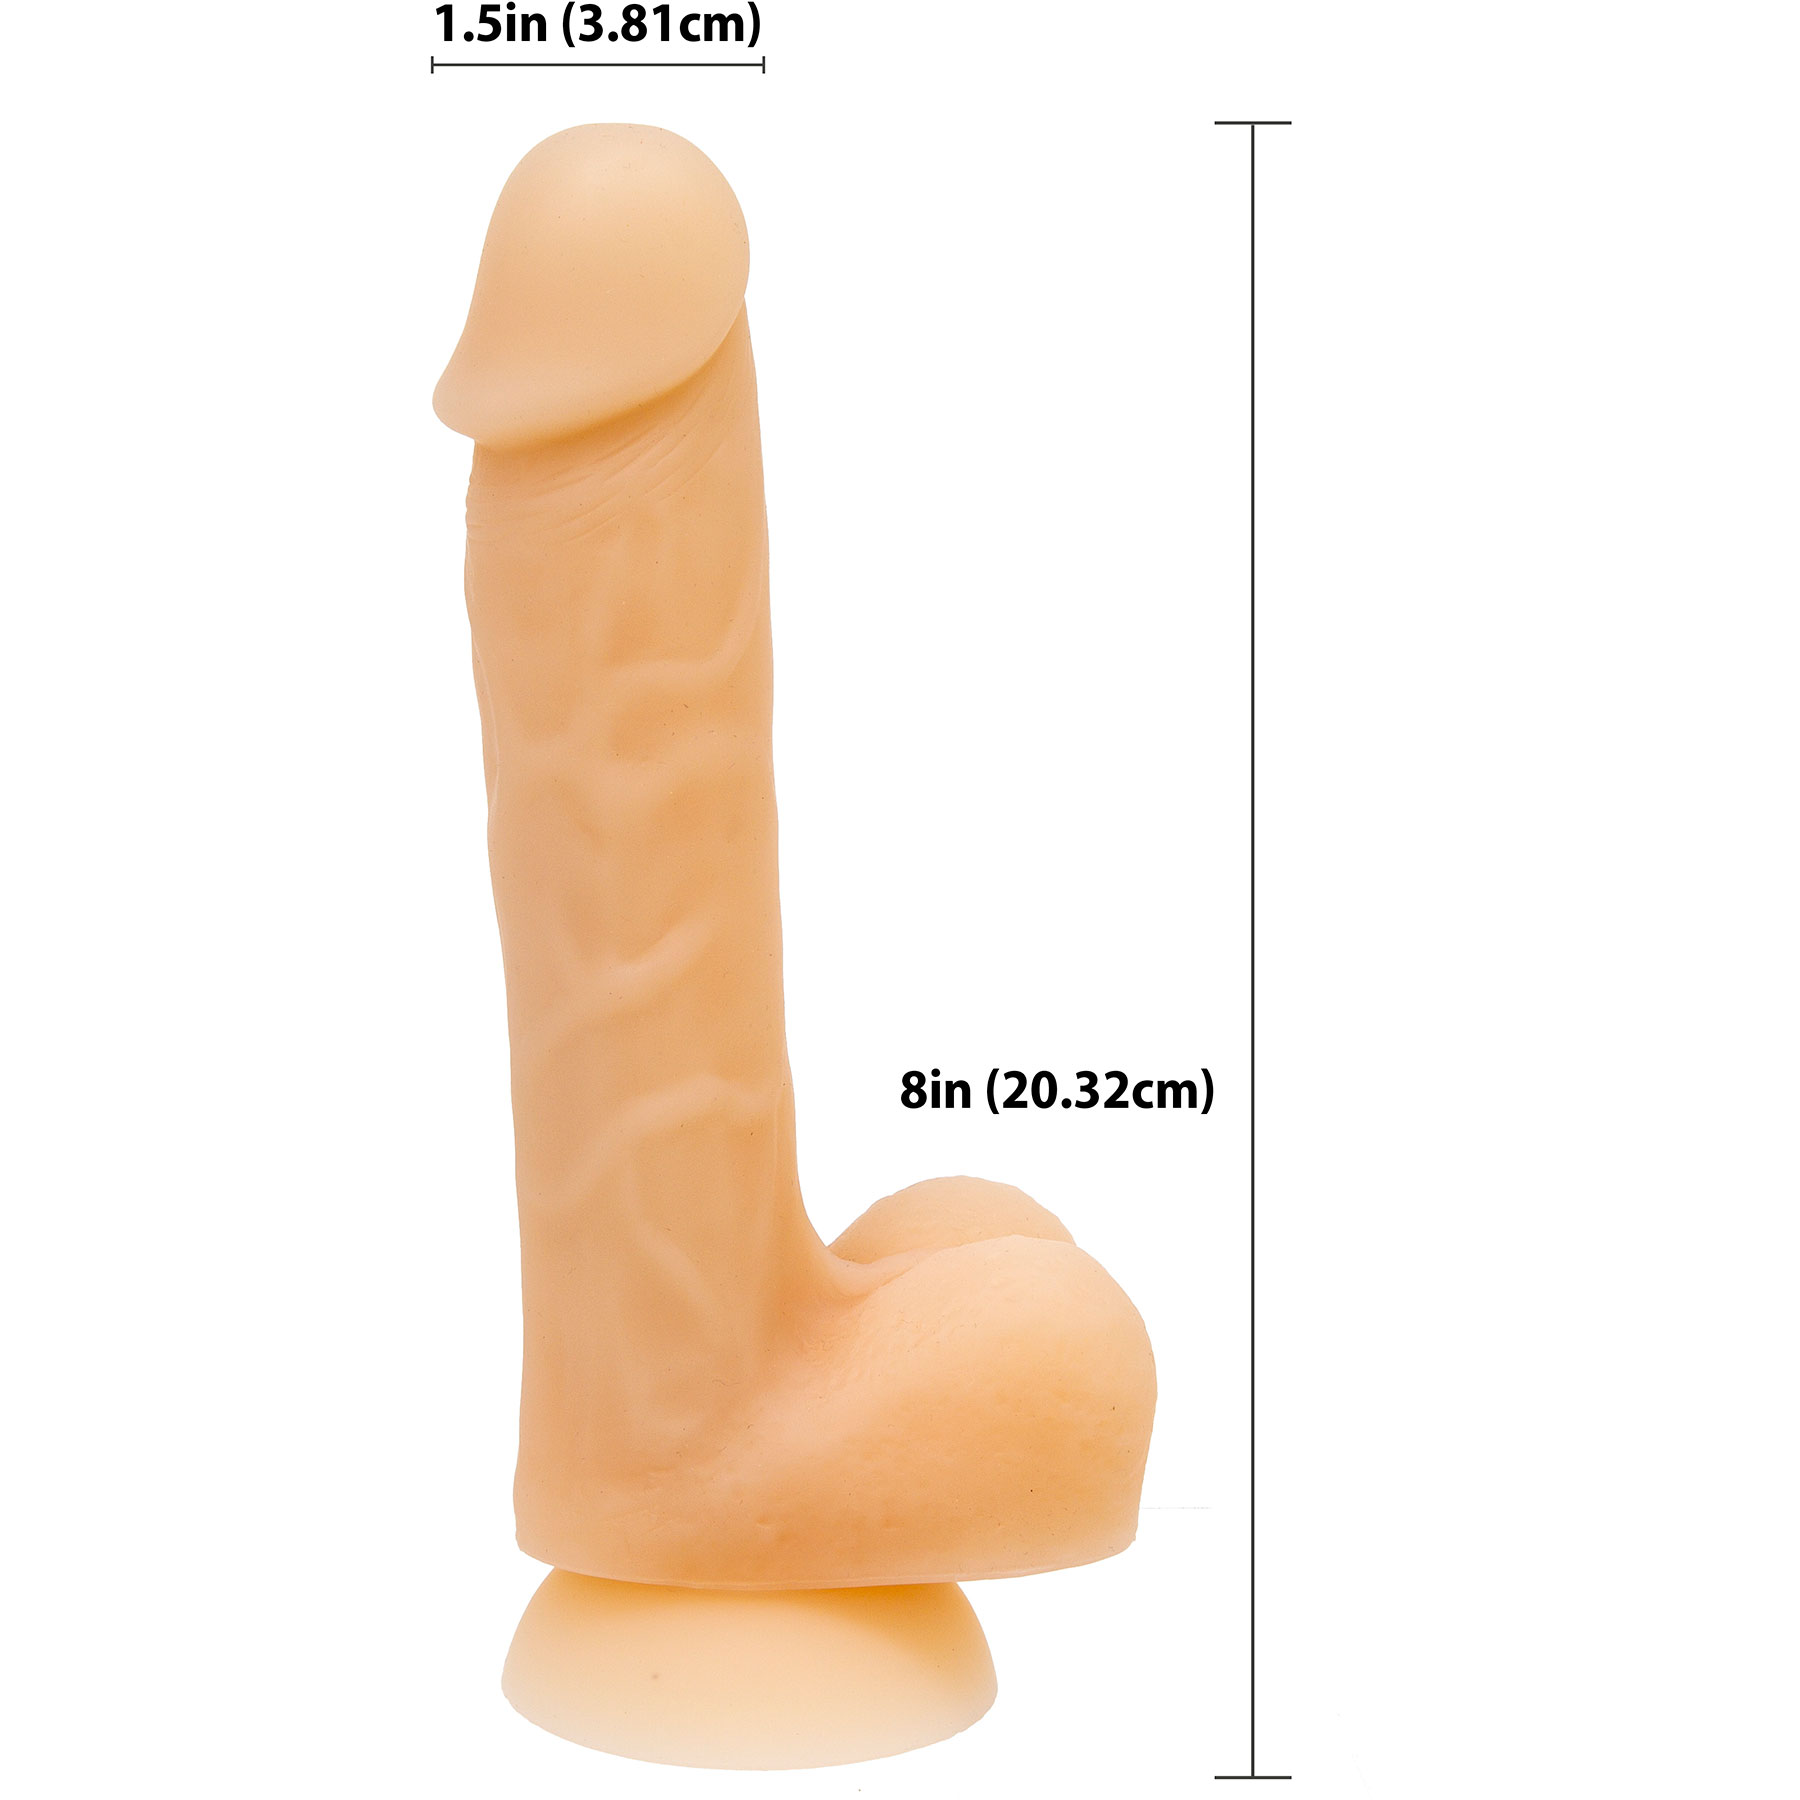 AAddiction - David 8 Inch Bendable Silicone Suction Cup Dildo With Balls - Measurements